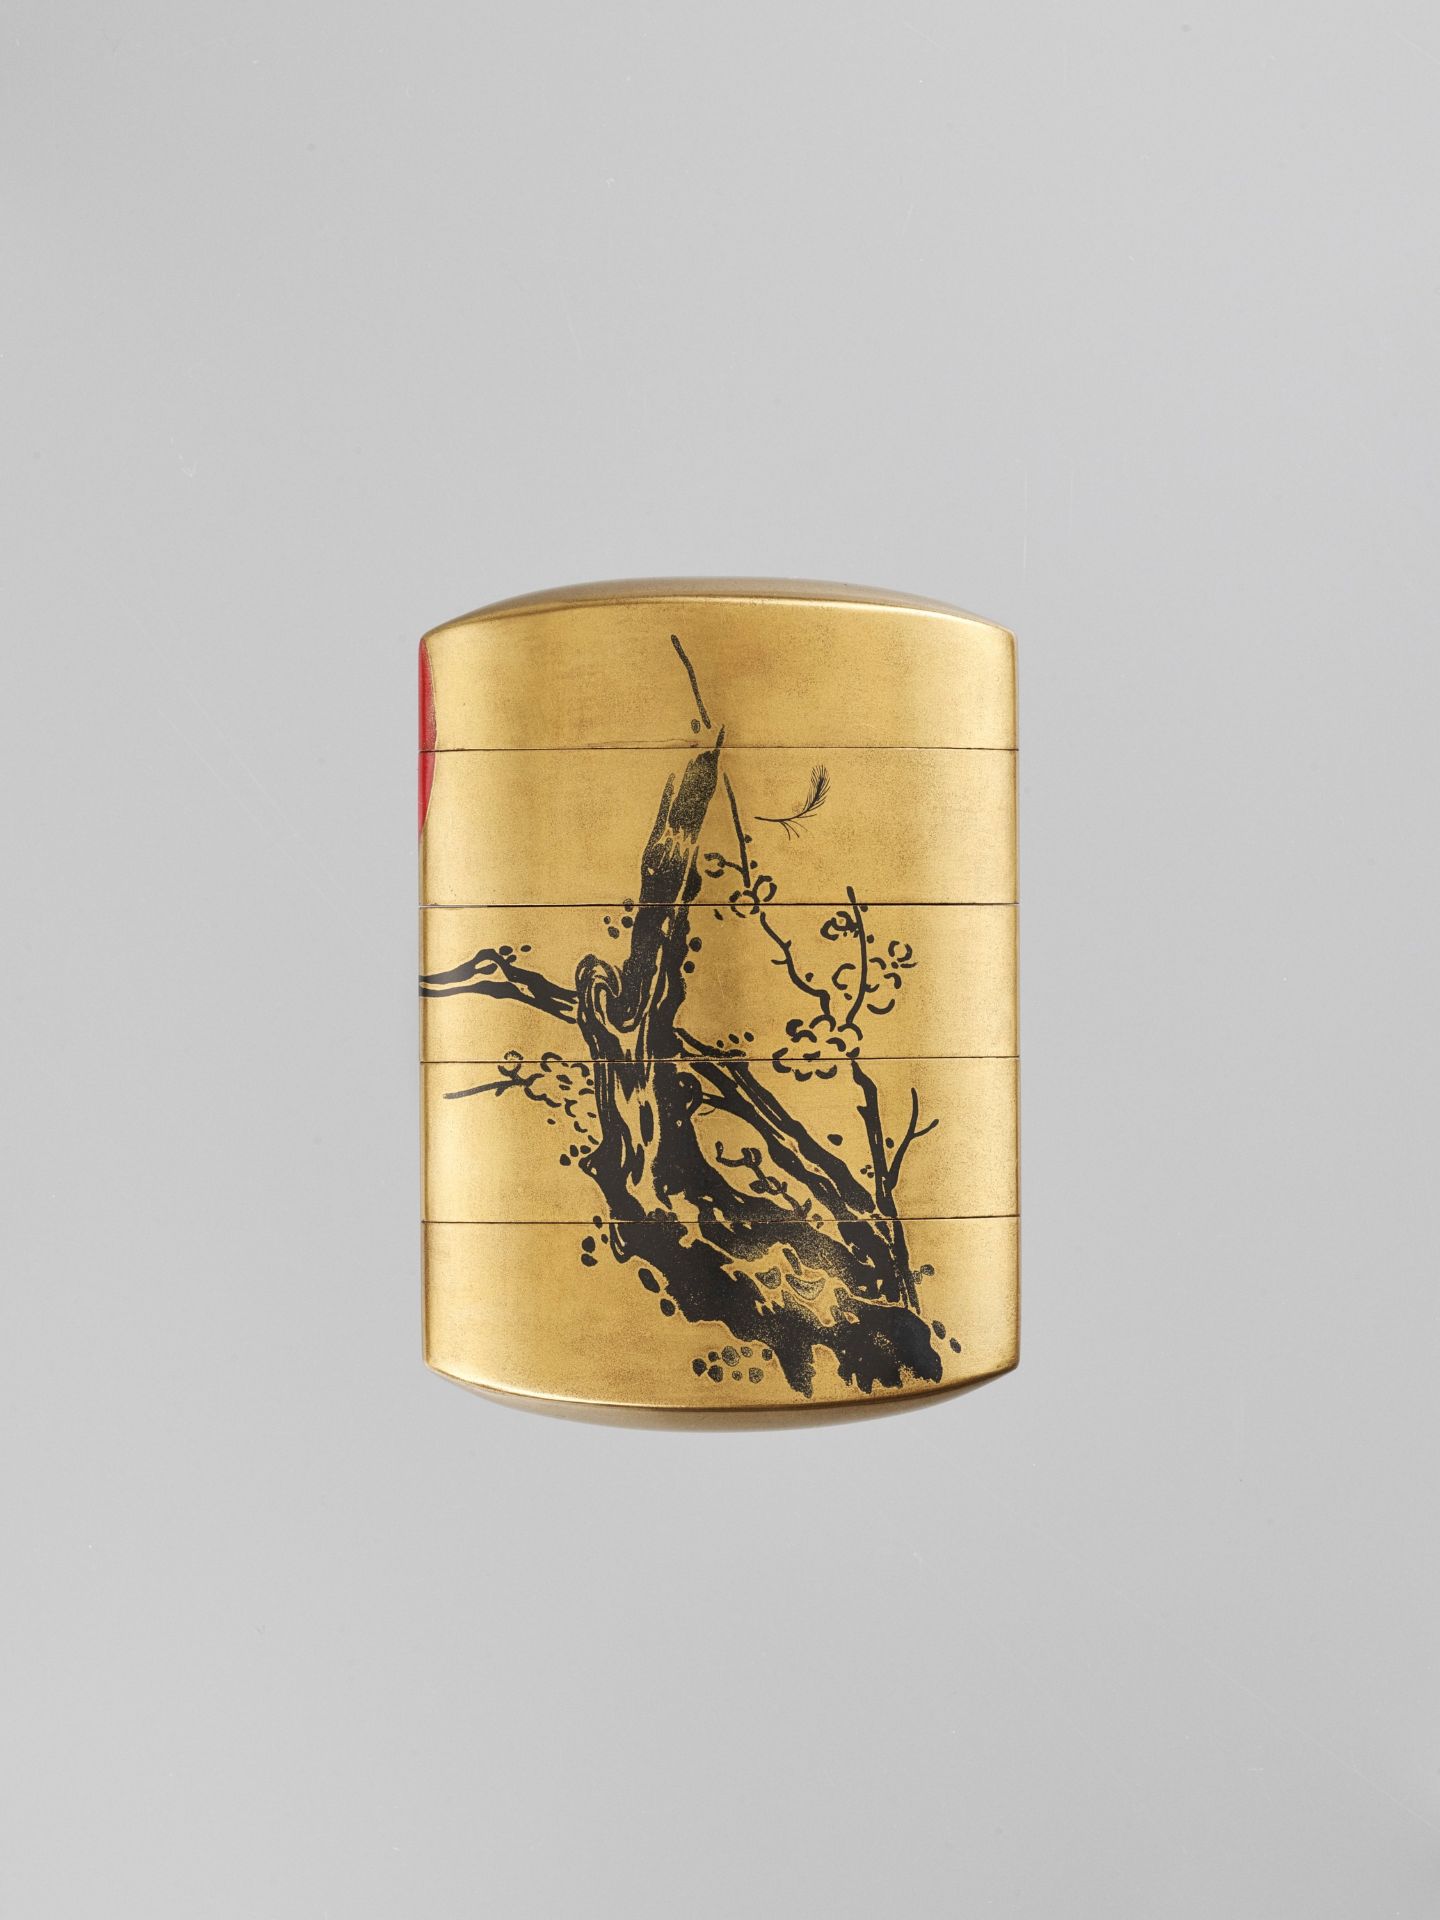 ZESHIN: A LACQUER FOUR-CASE INRO DEPICTING A CROW AGAINST A RED MOON - Bild 3 aus 7